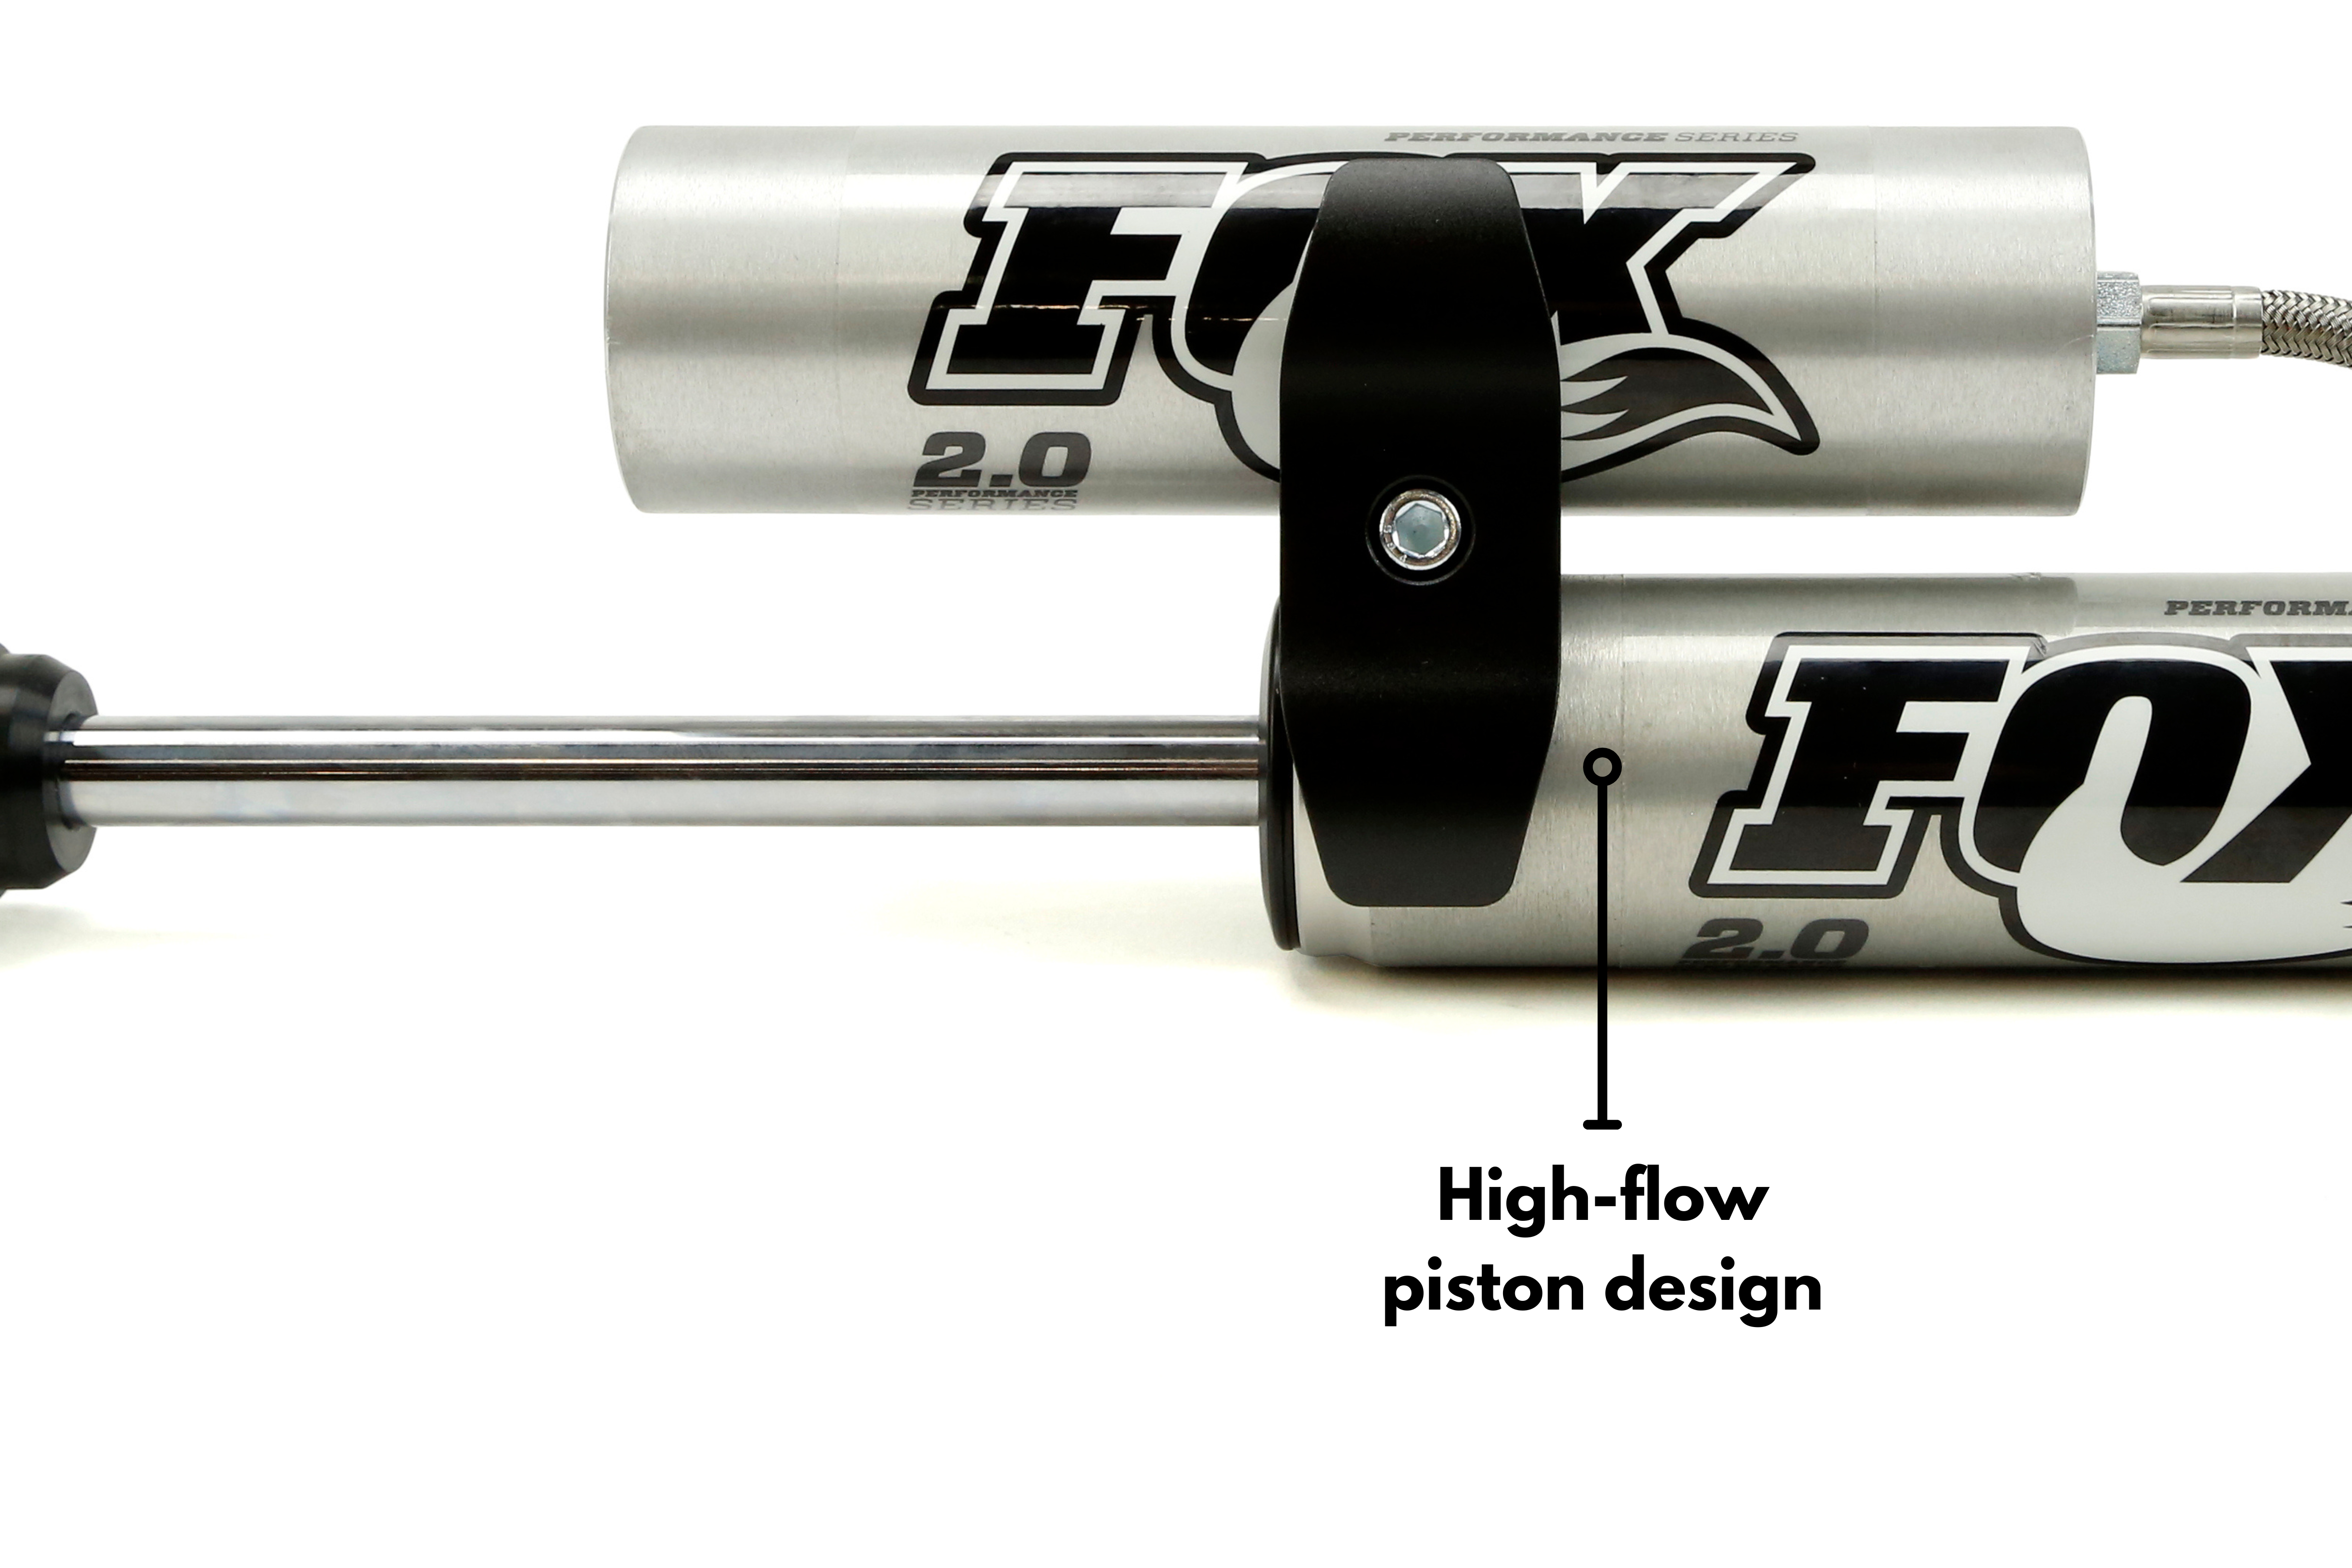 The Fox 2.0s have a high-flow piston design, allowing for improved handling